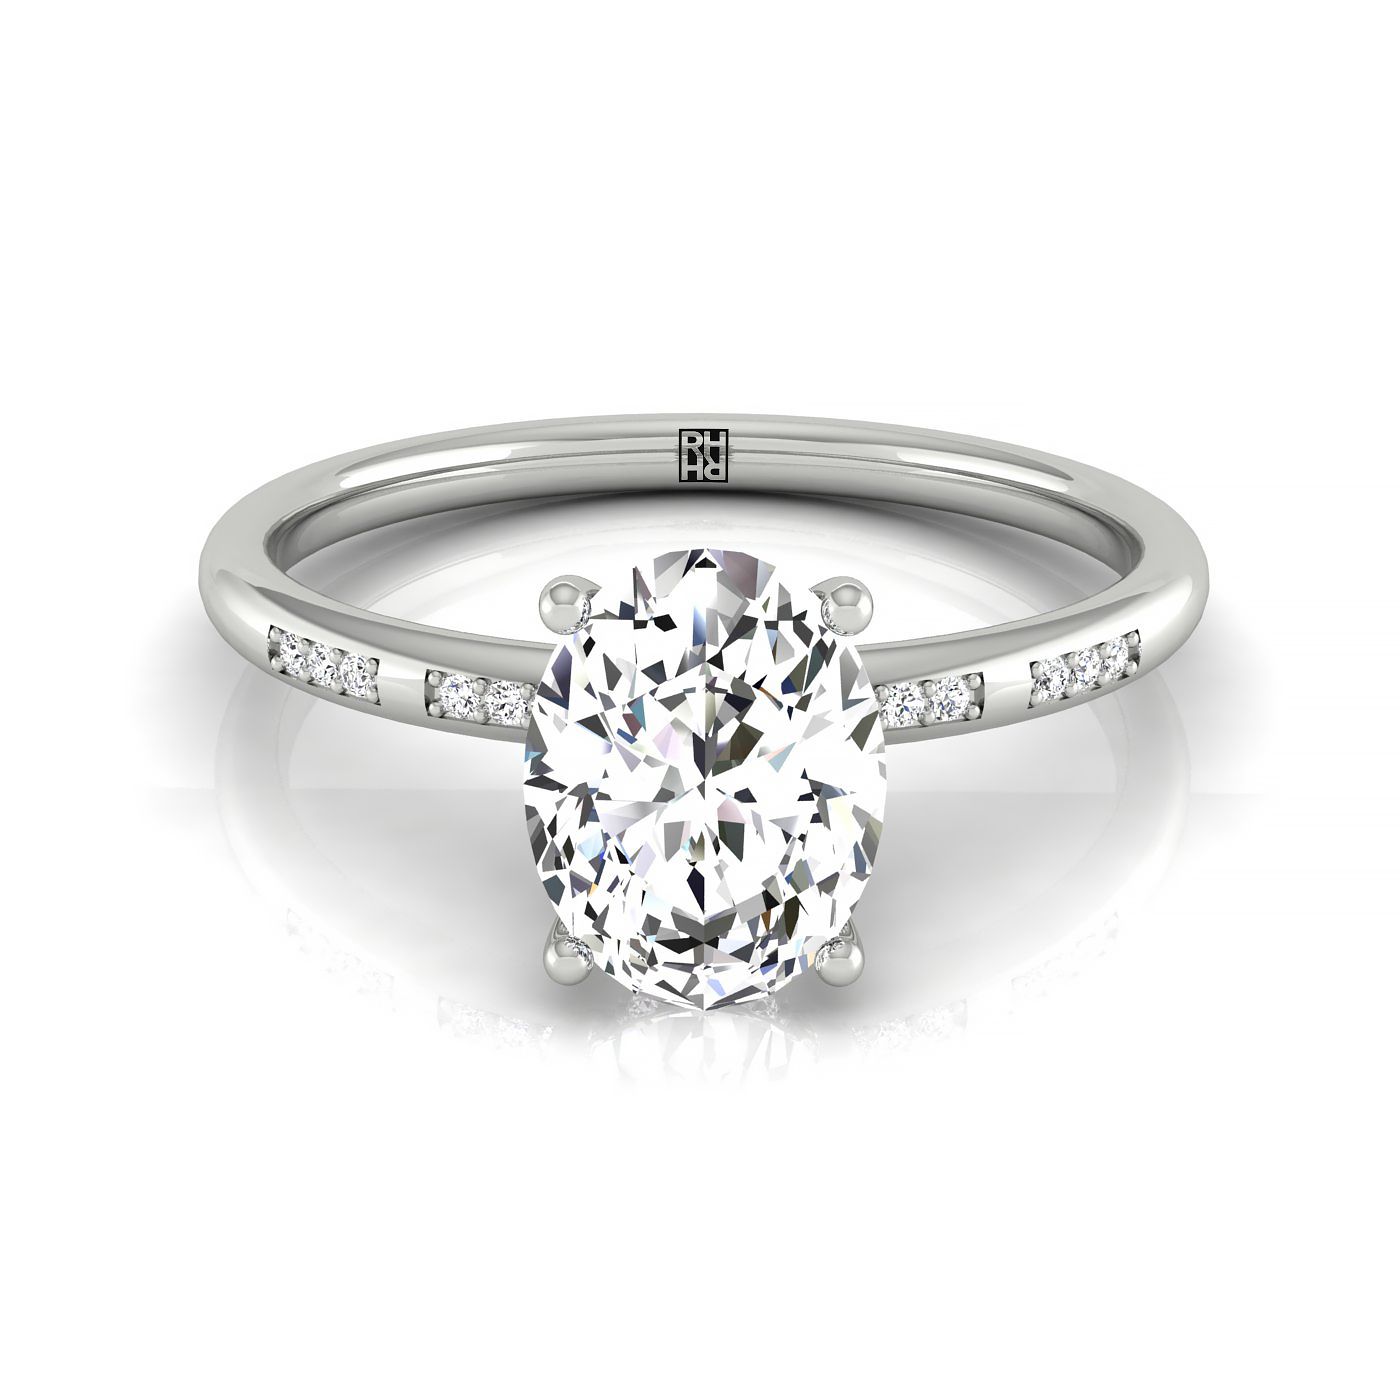 18kw Oval Engagement Ring With High Hidden Halo With 26 Prong Set Round Diamonds